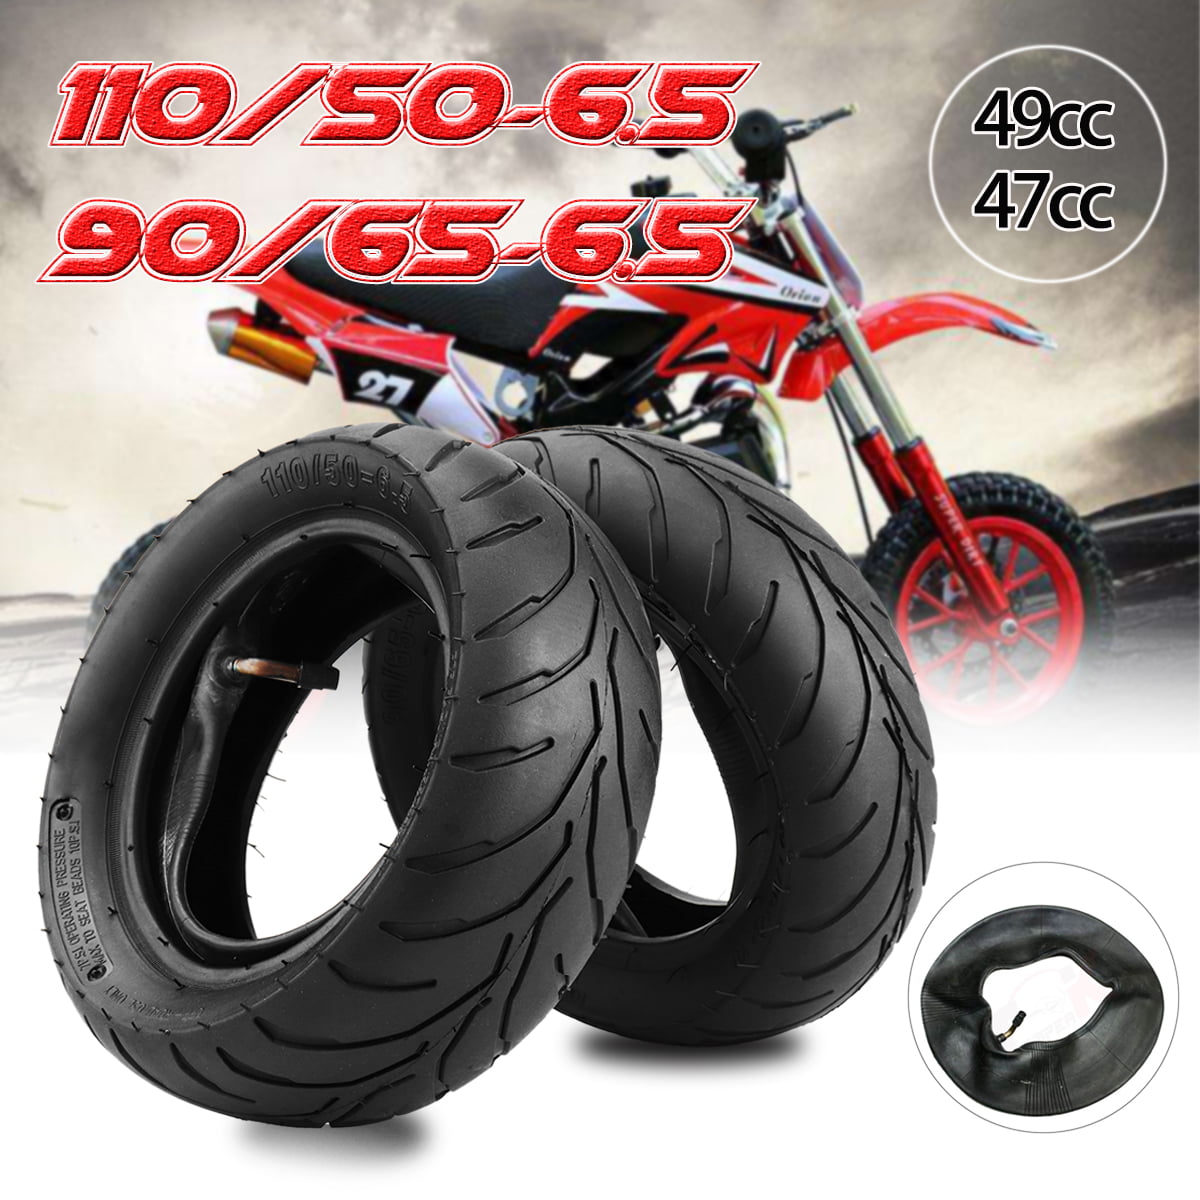 Product Upgraded Hyssk 110/50-6.5 Tubeless Tire and Inner Tube for 49cc Pocket Rocket Bike Rear Back Tire 